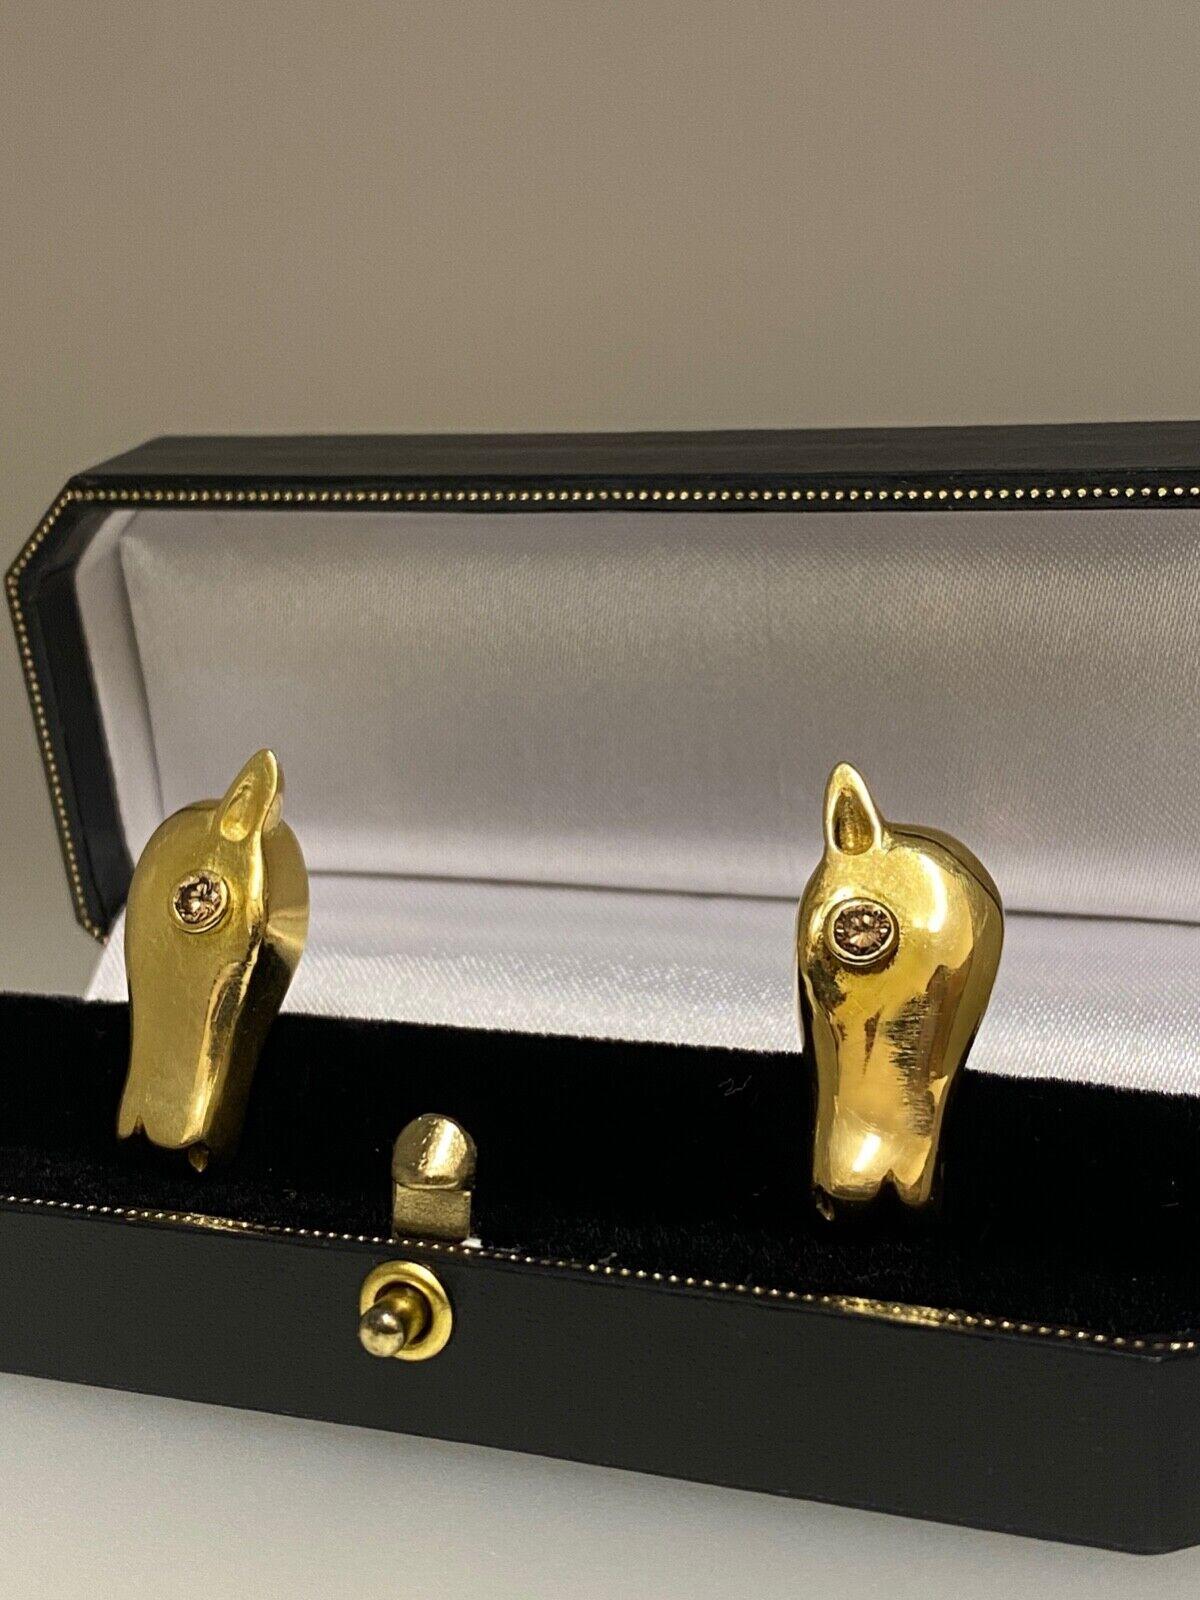 This superb piece of mens' jewelry surely does make a statement!

Finely crafted in 18K Yellow Gold 
these cufflinks are designed as horse heads, 
each measuring 28mm x 13mm 

Each bezel set with a Round Argyle Champagne 
of fine C6 colour & very